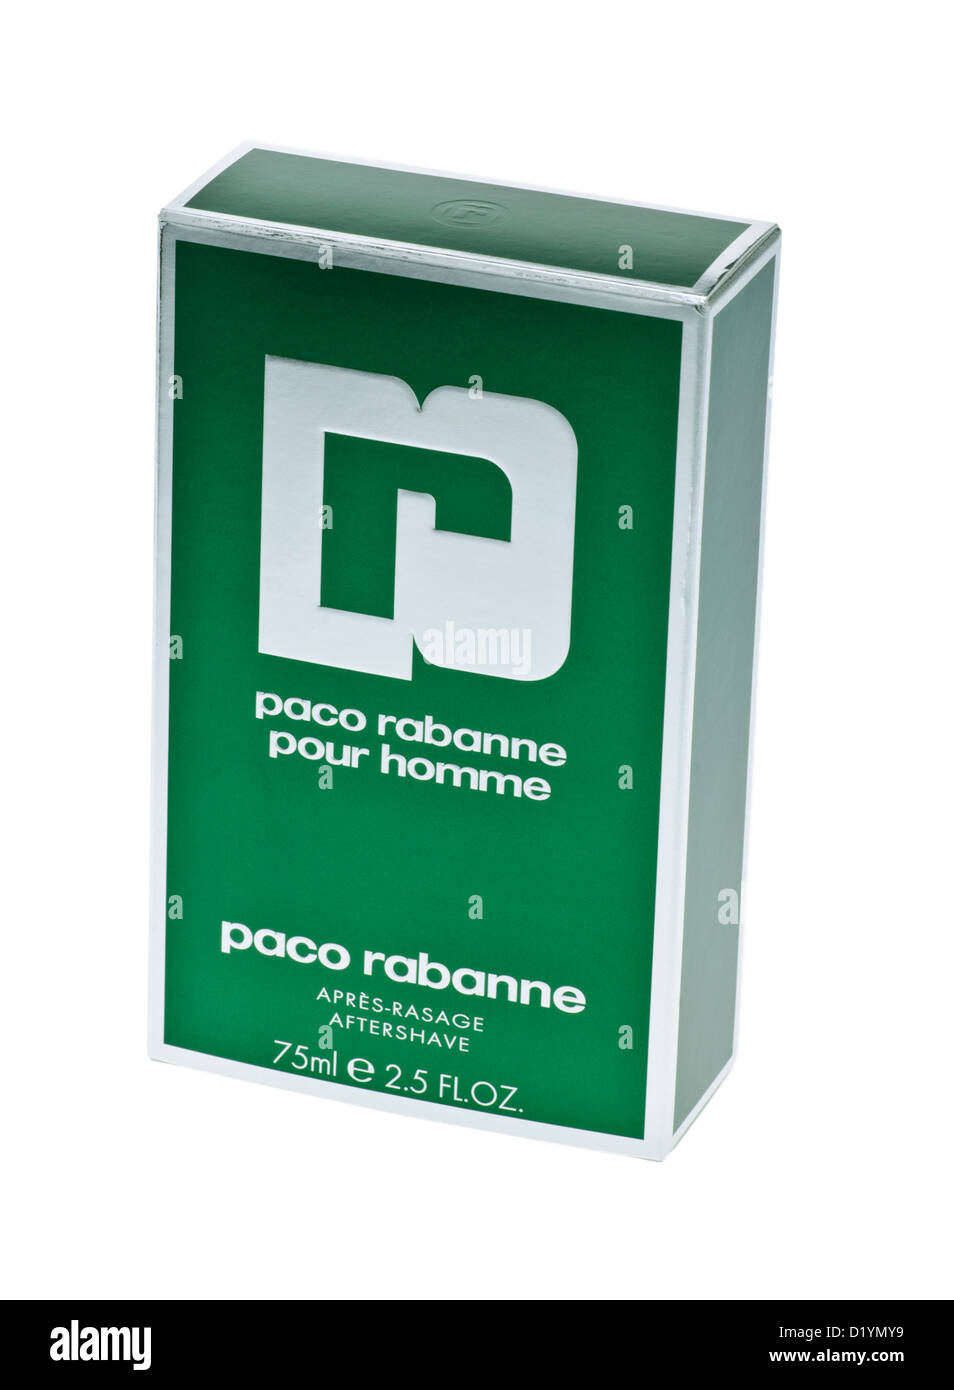 Paco Rabanne Aftershave. Stock Photo